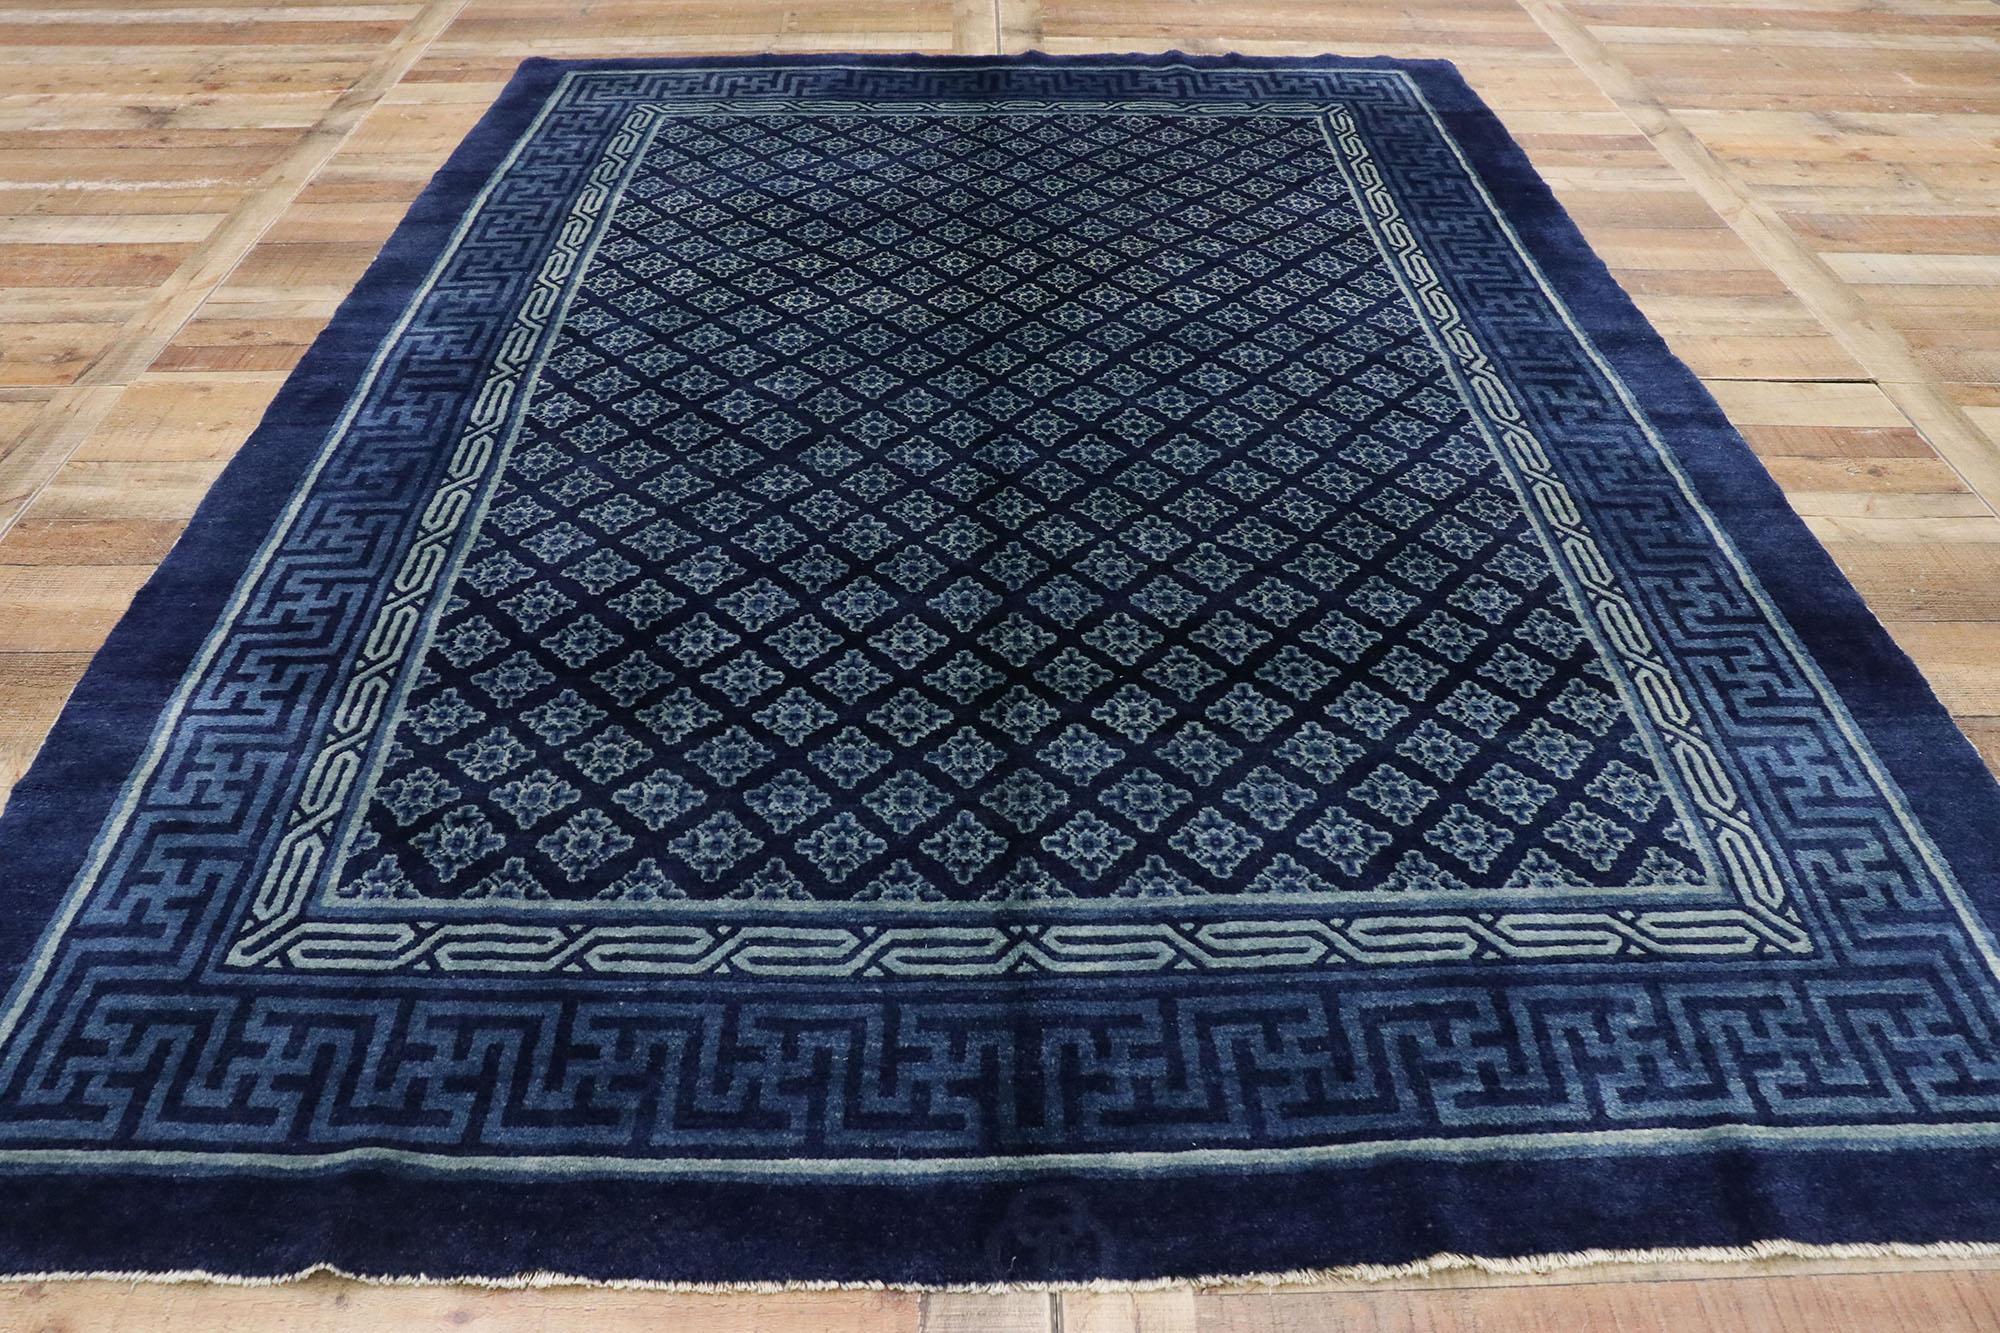 Antique Chinese Baotou Rug with Qing Dynasty Style 1